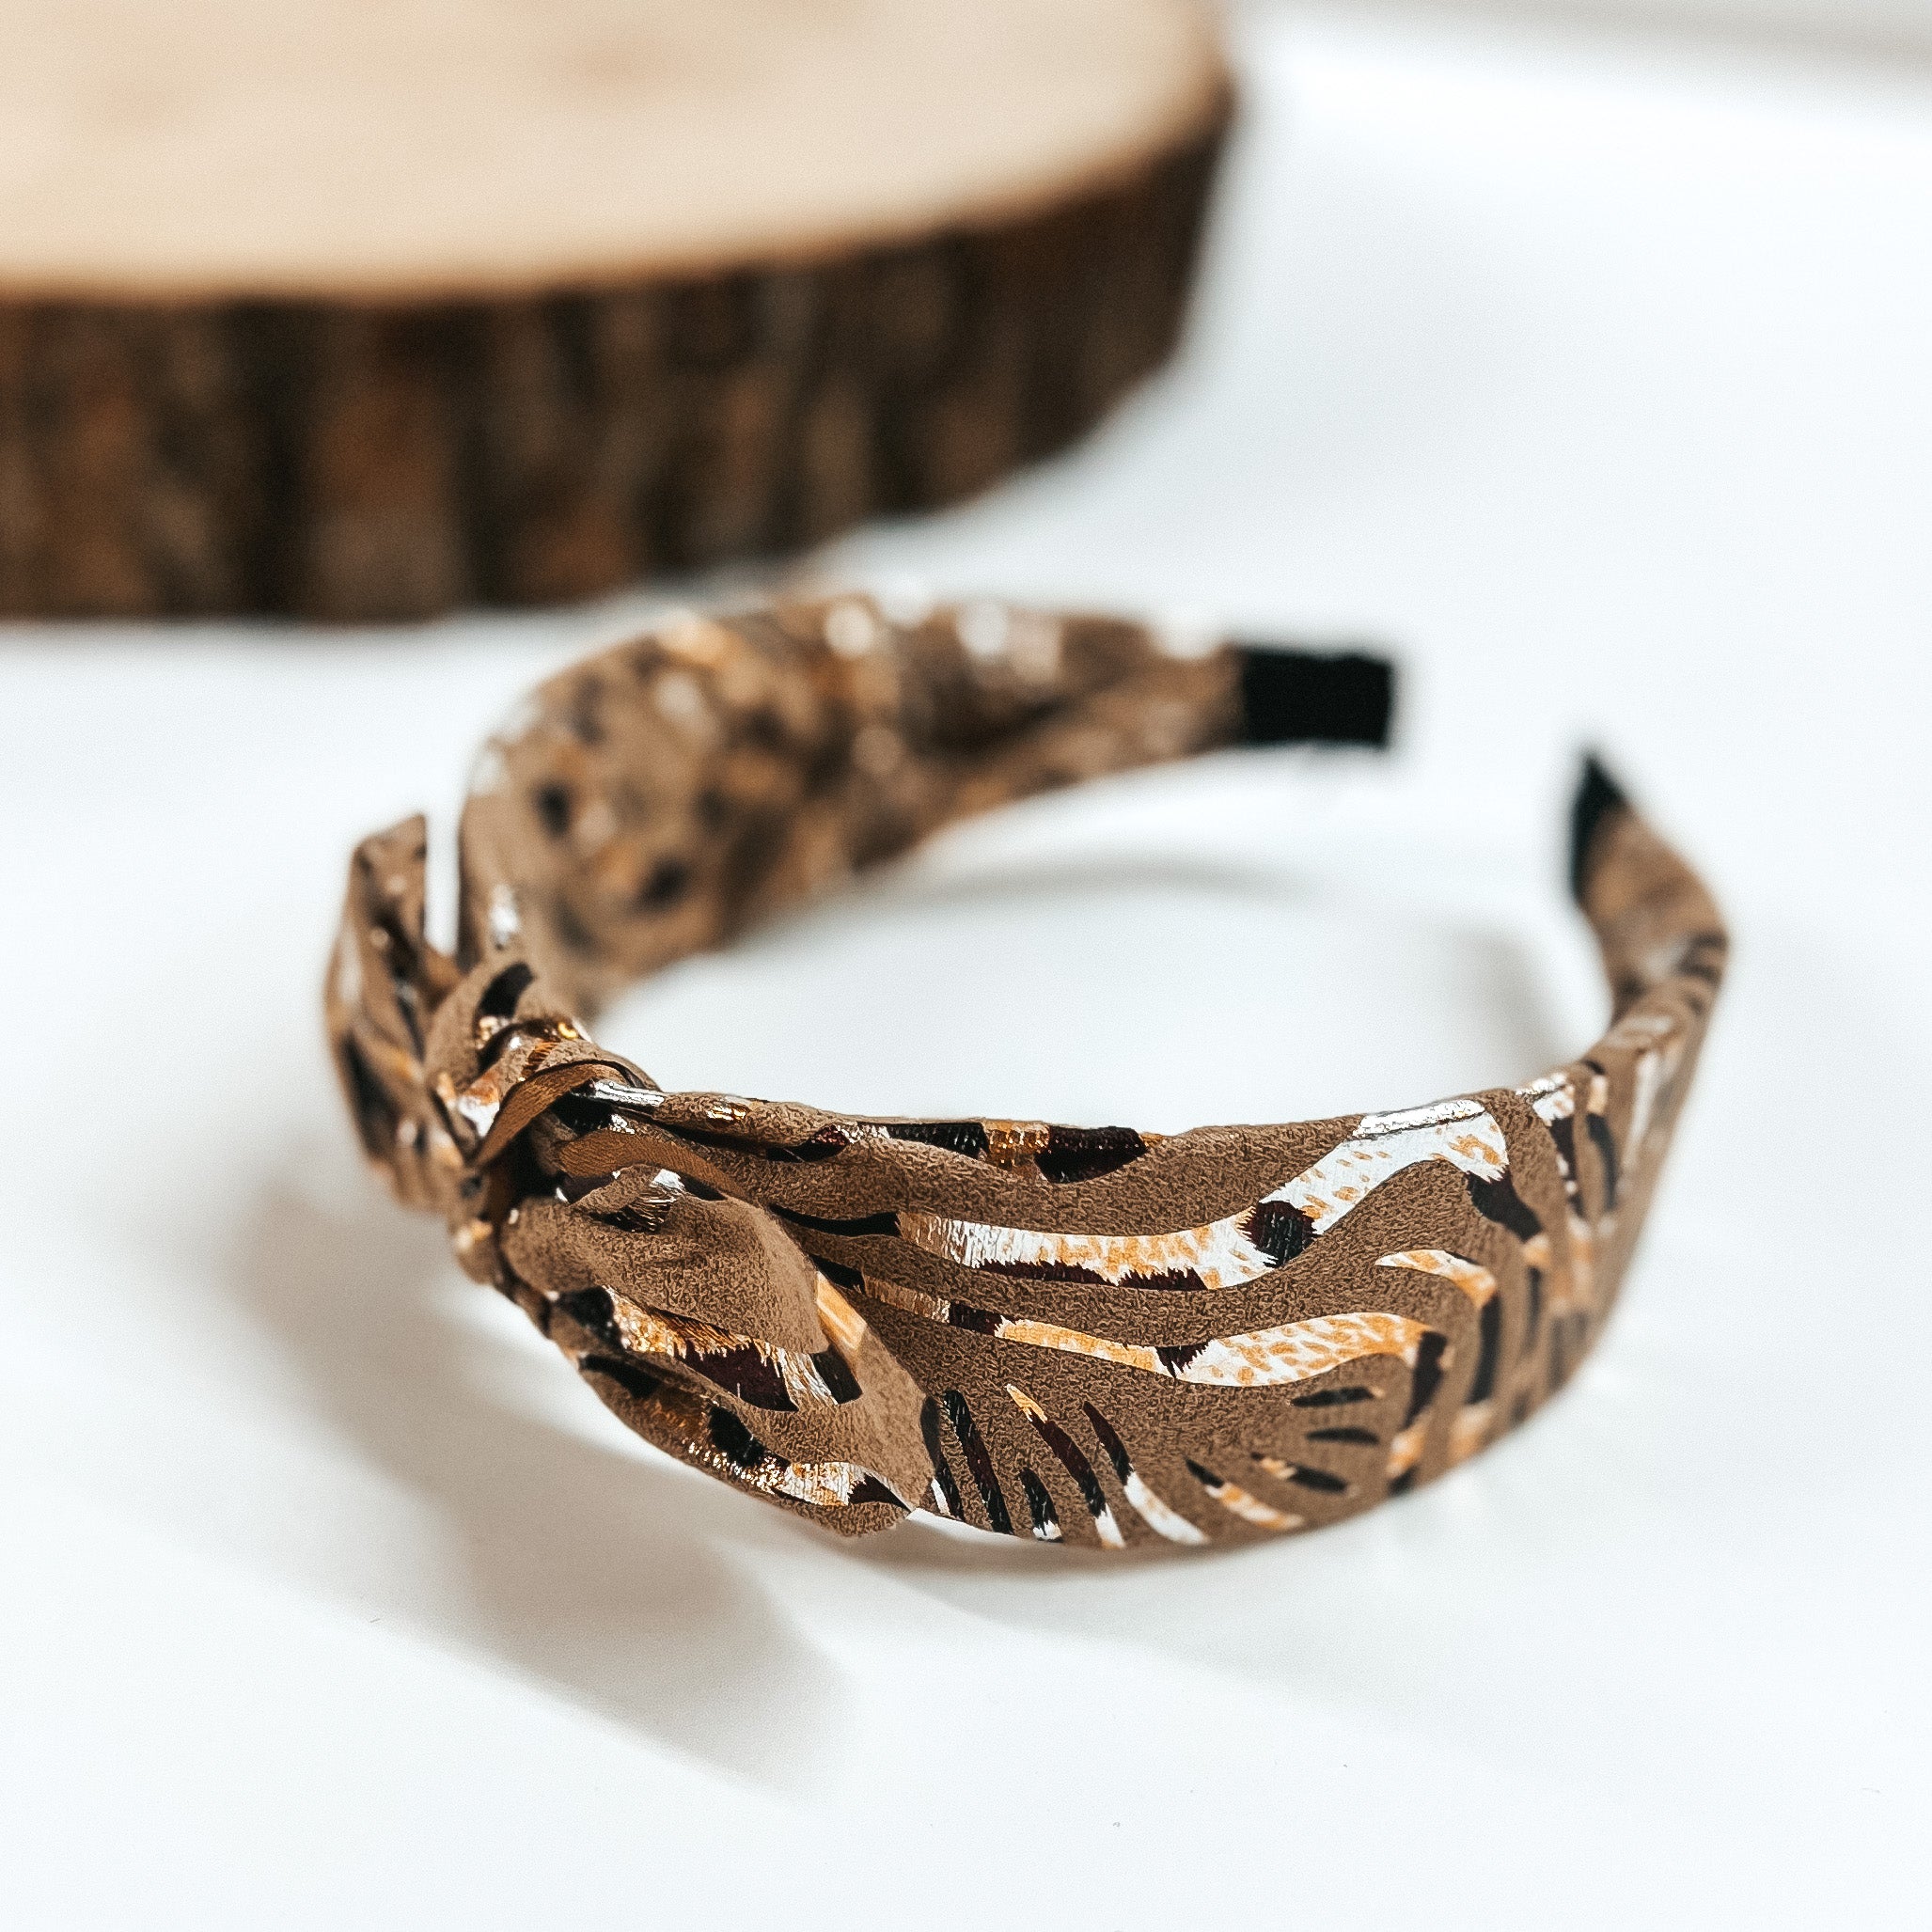 Buy 3 for $10 |  Zebra Gold Foil Headbands with Tie on Plastic Headband - Giddy Up Glamour Boutique